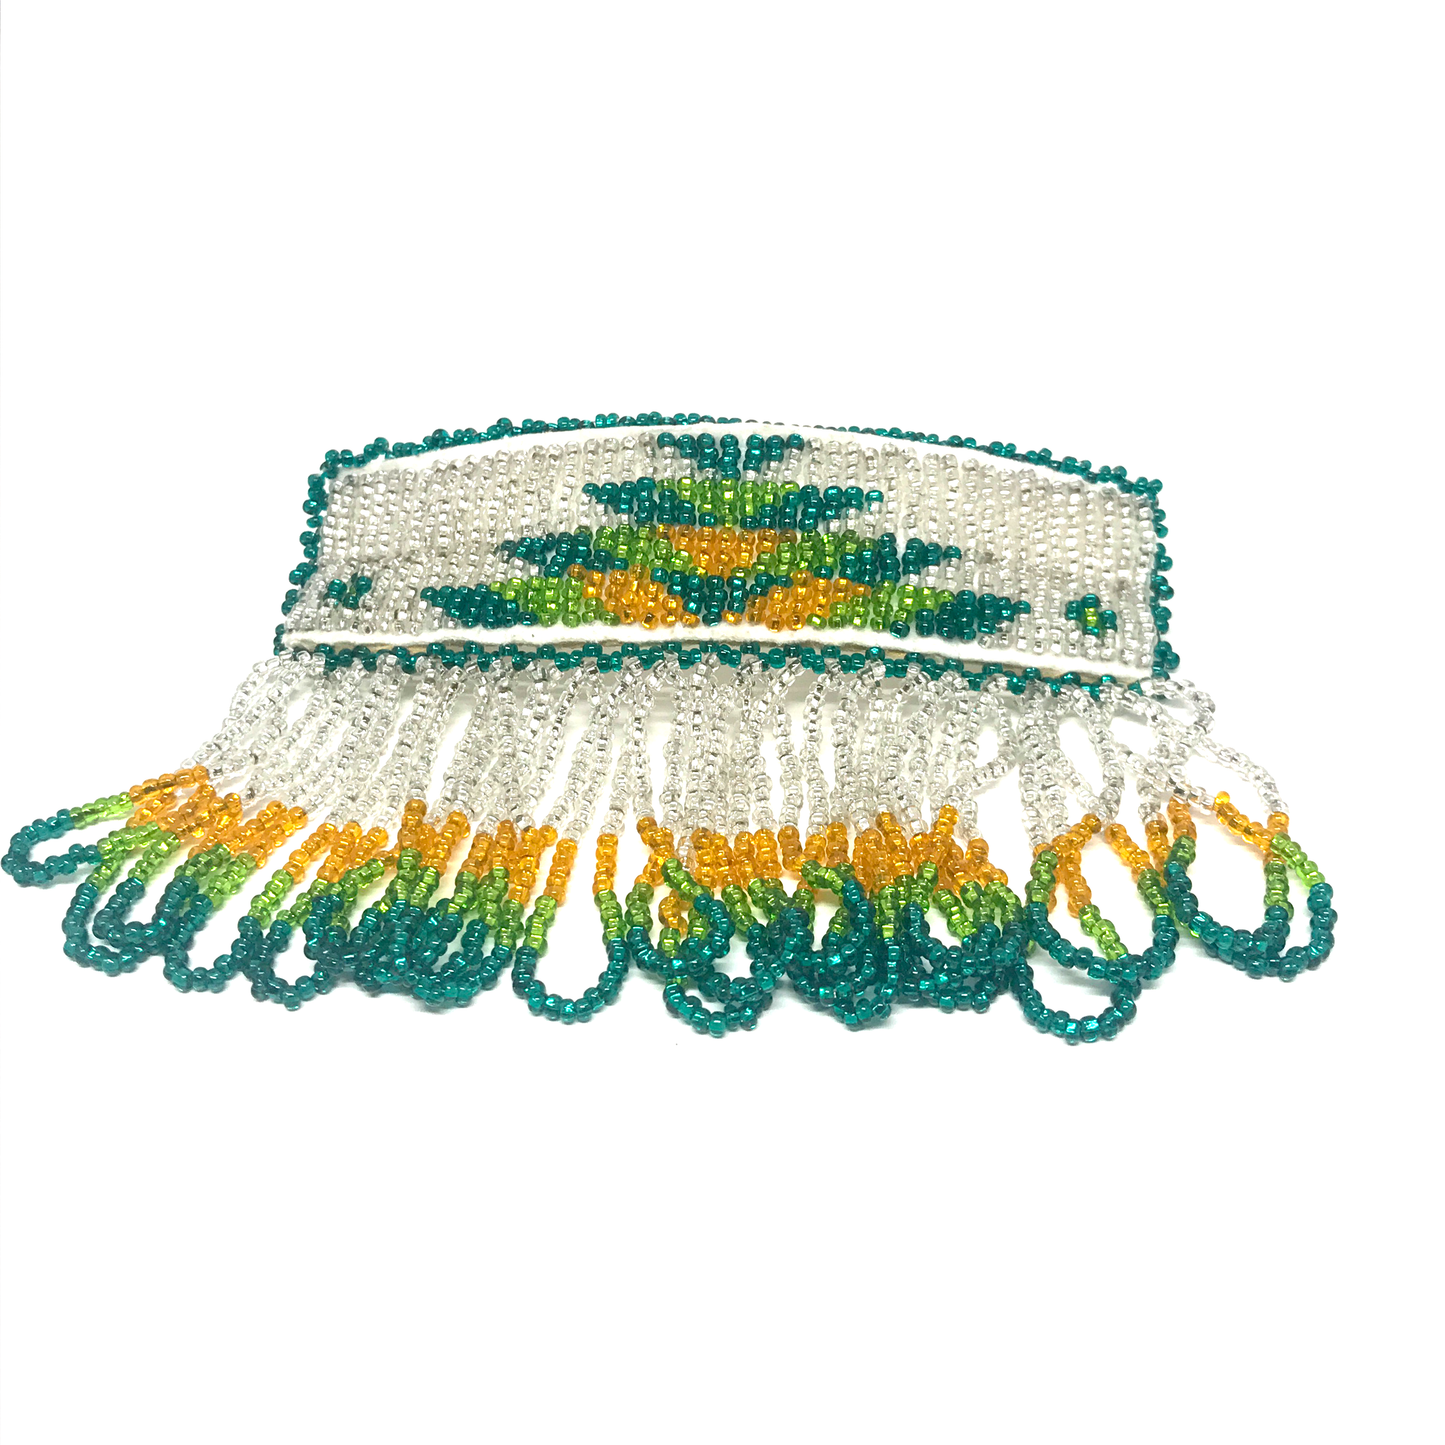 Loretta Cook - Green, Yellow and White Dance Barrette - Intertribal Creatives by Running Strong for American Indian Youth